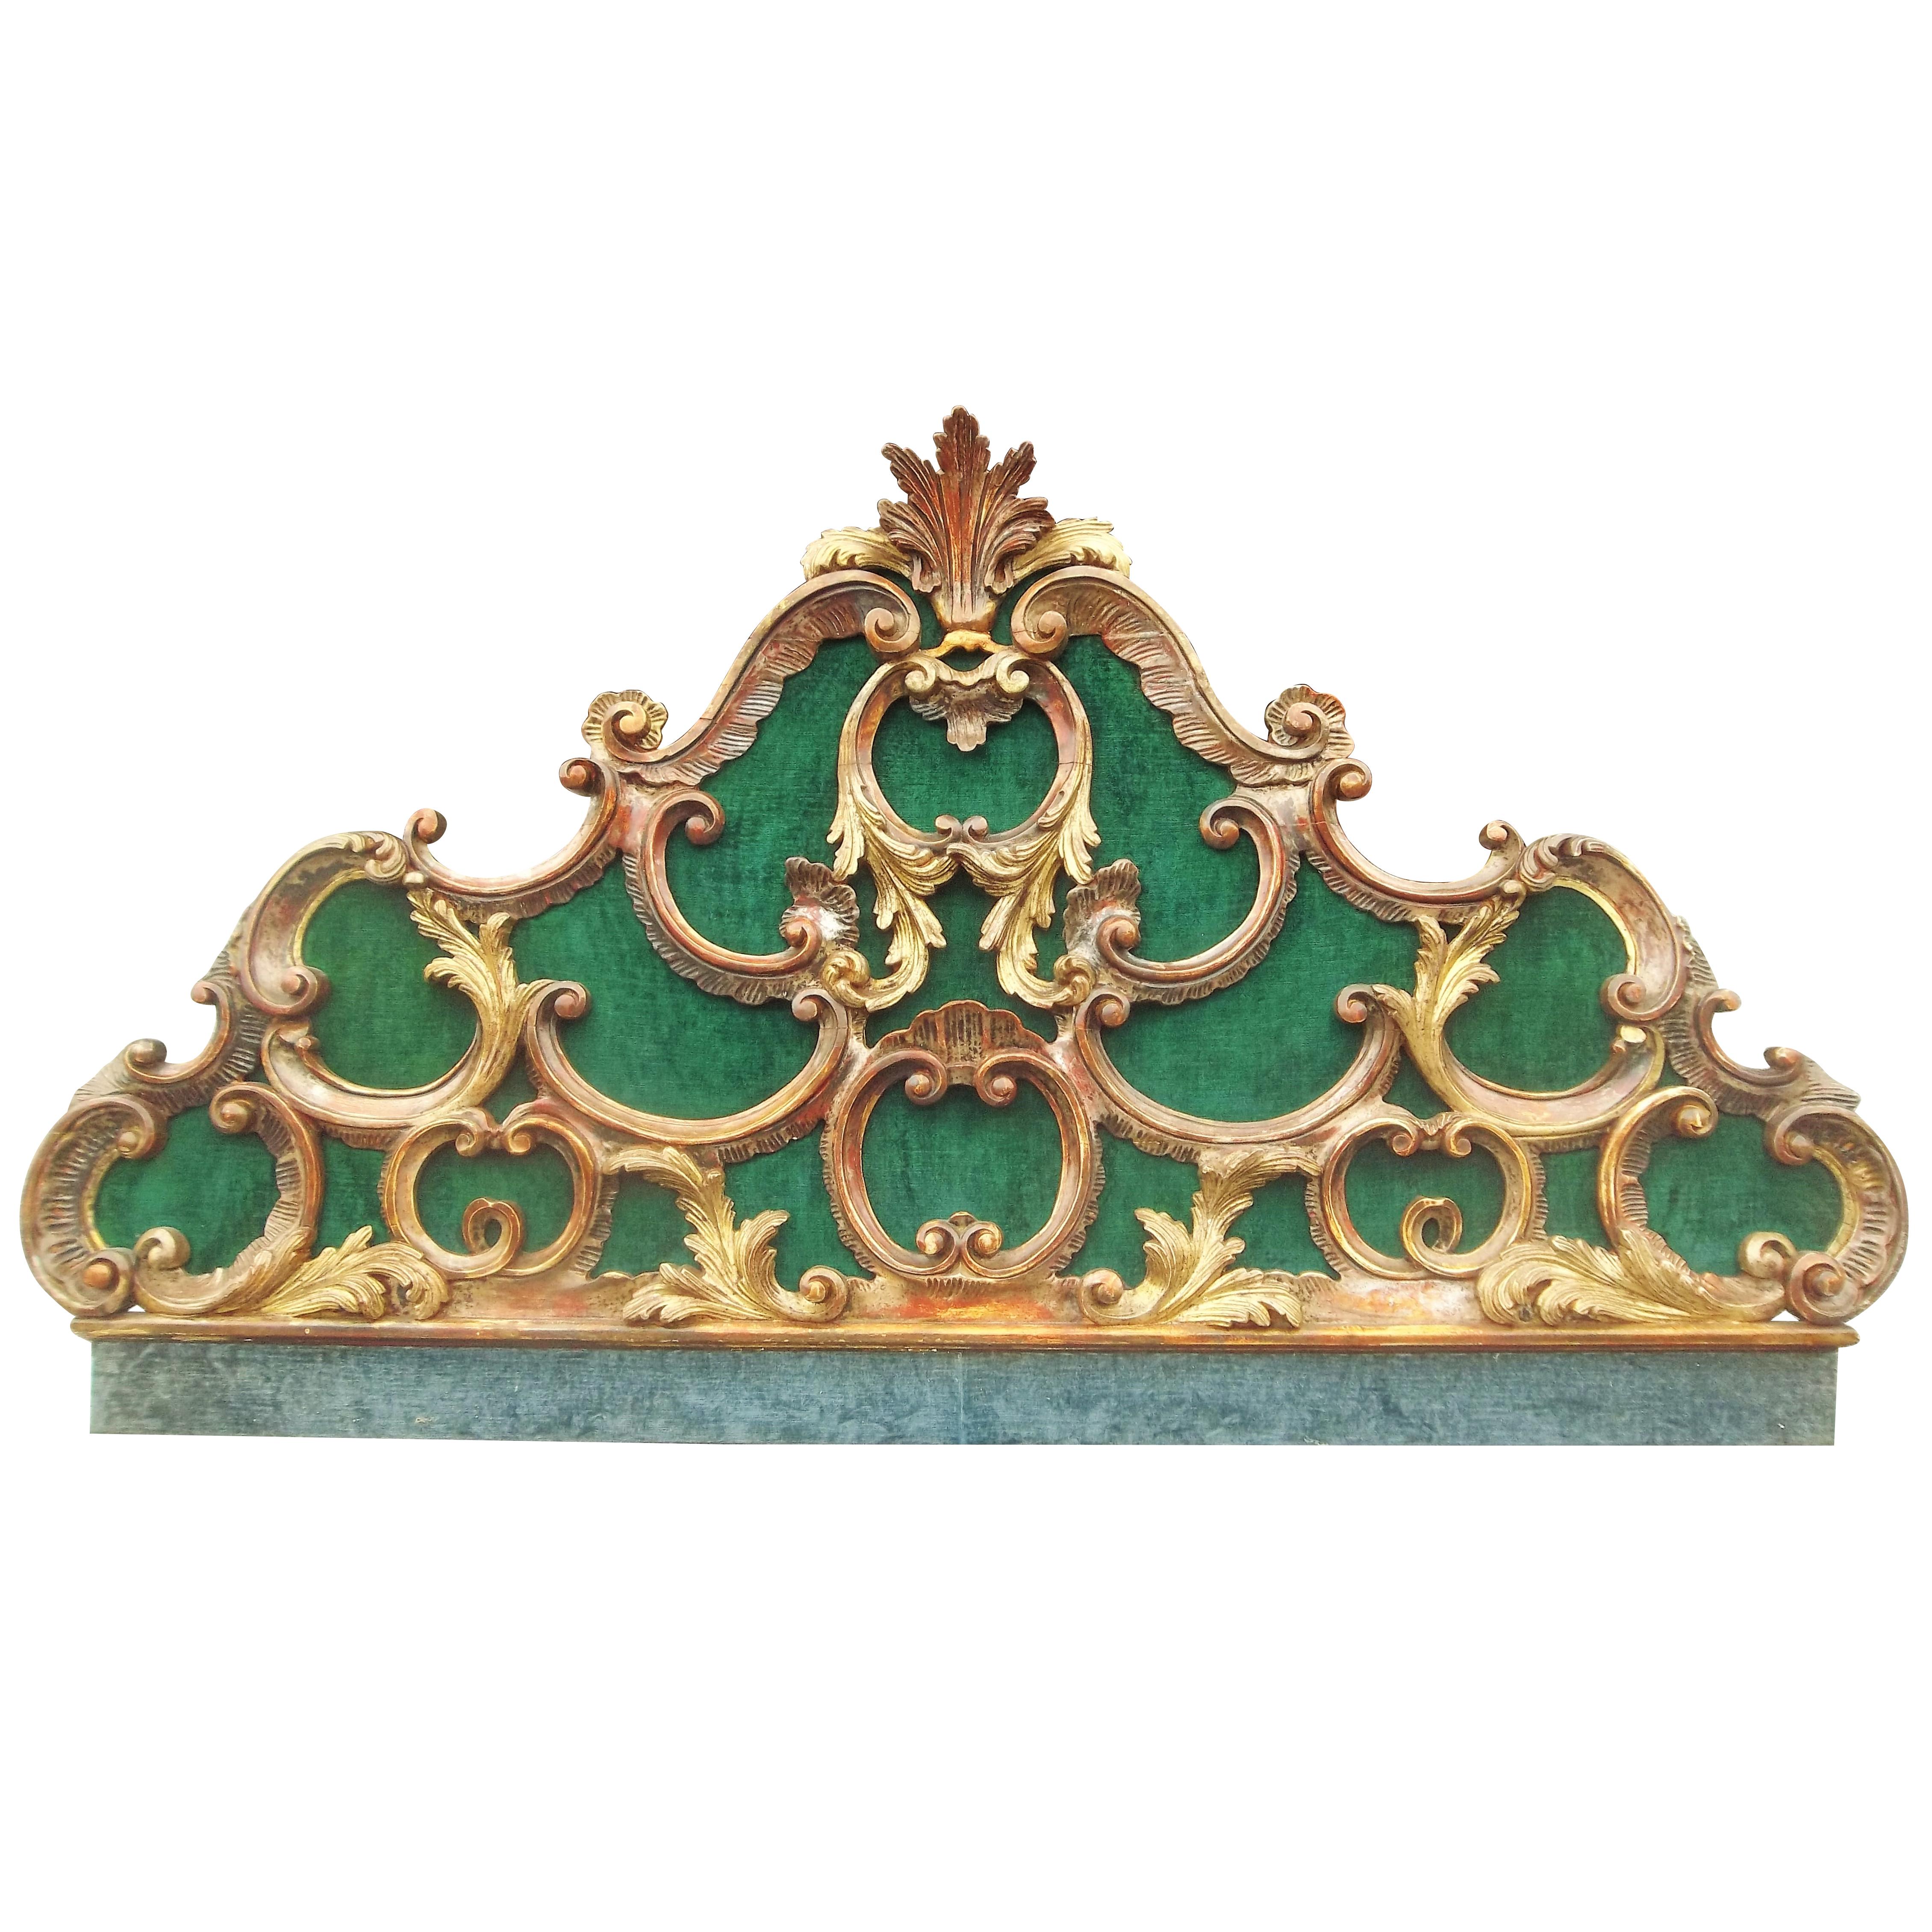 Venetian or Italian Giltwood Robustly Carved Headboard in Rococo Style